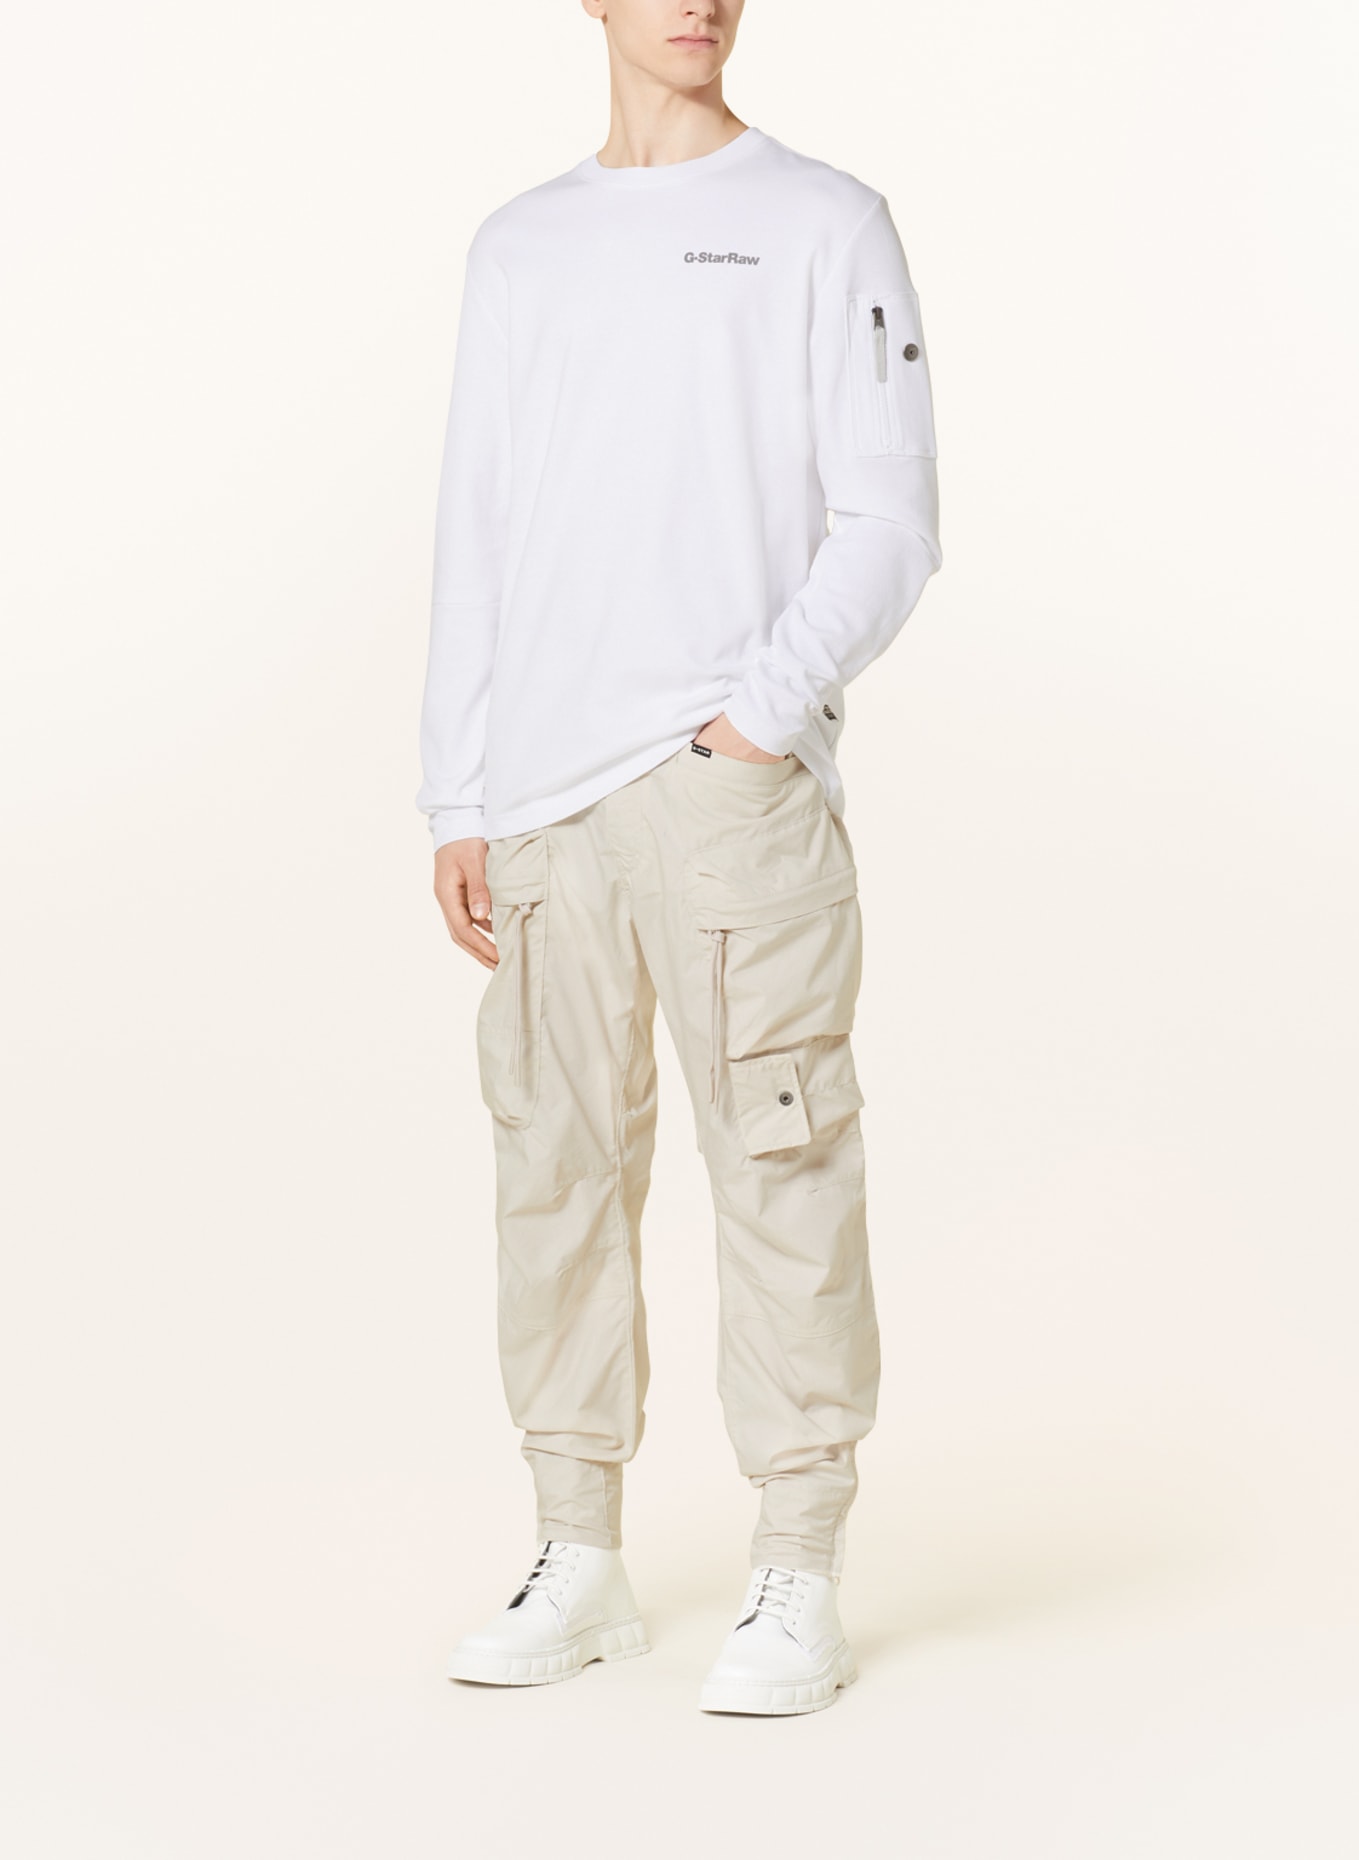 G-Star RAW Long sleeve shirt, Color: WHITE (Image 2)